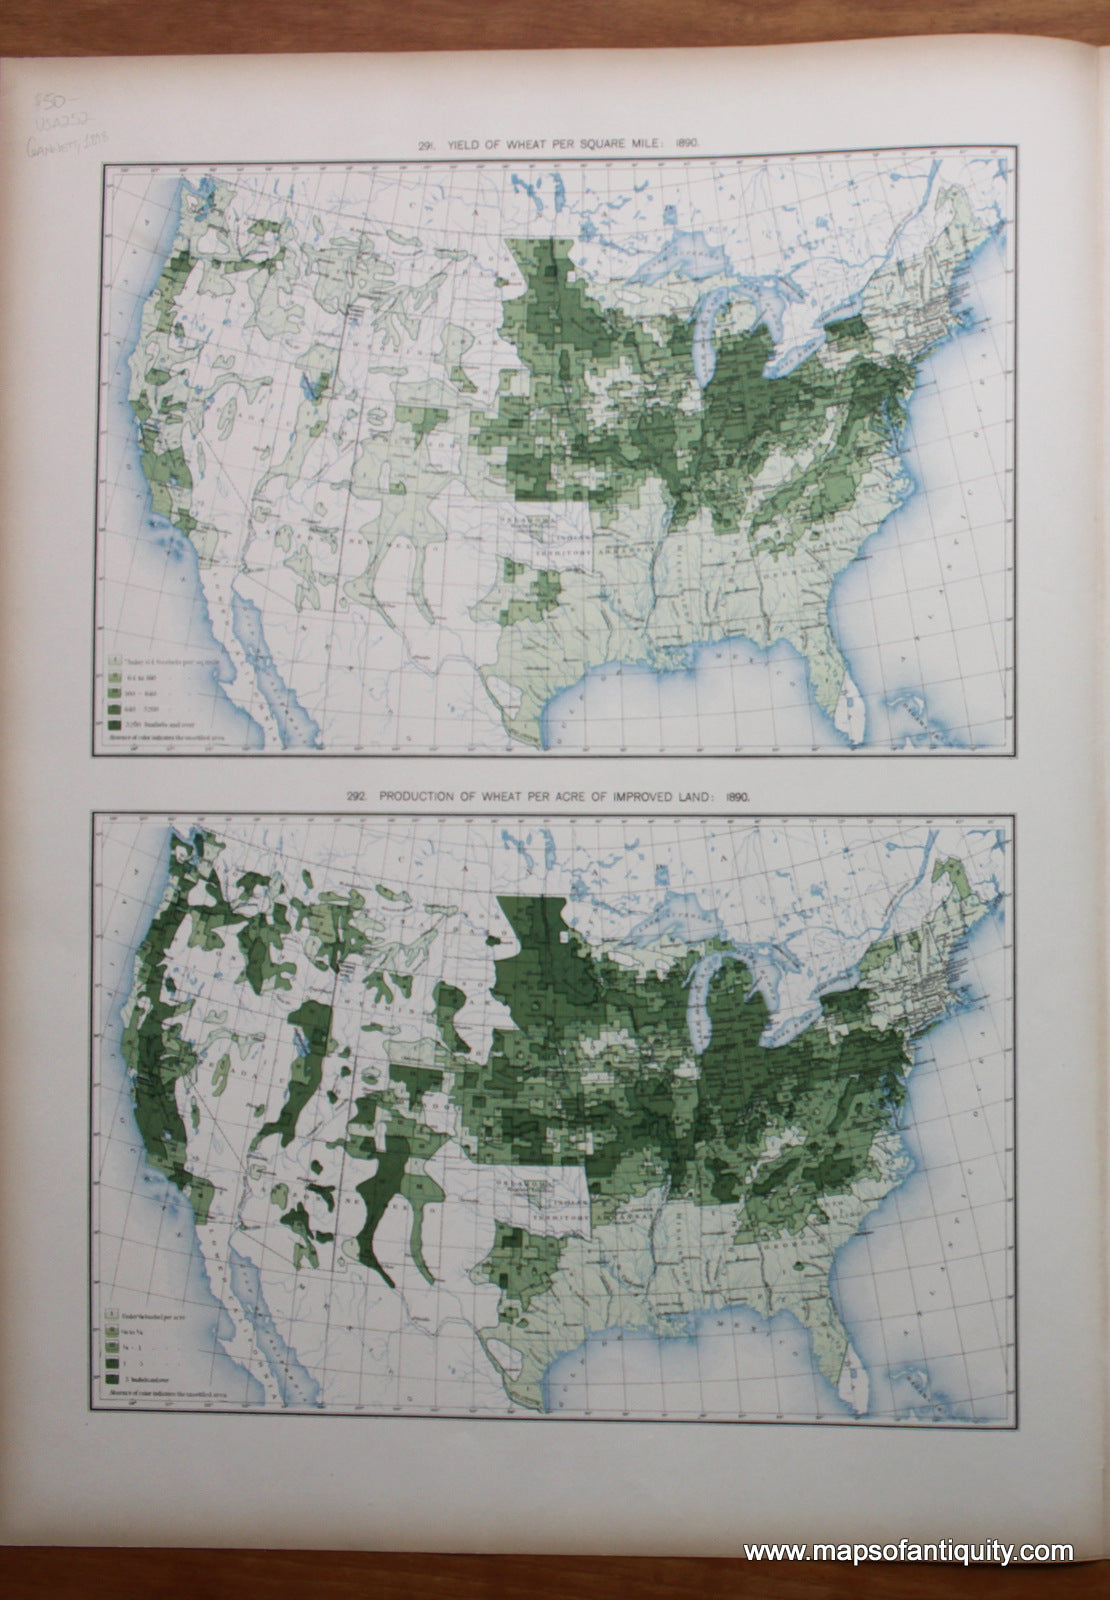 Antique-Printed-Color-Map-Yield-of-Wheat-Per-Square-Mile:-1890/-Production-of-Wheat-Per-Acre-of-Improved-Land:-1890-United-States-United-States-General-1898-Gannett-Maps-Of-Antiquity